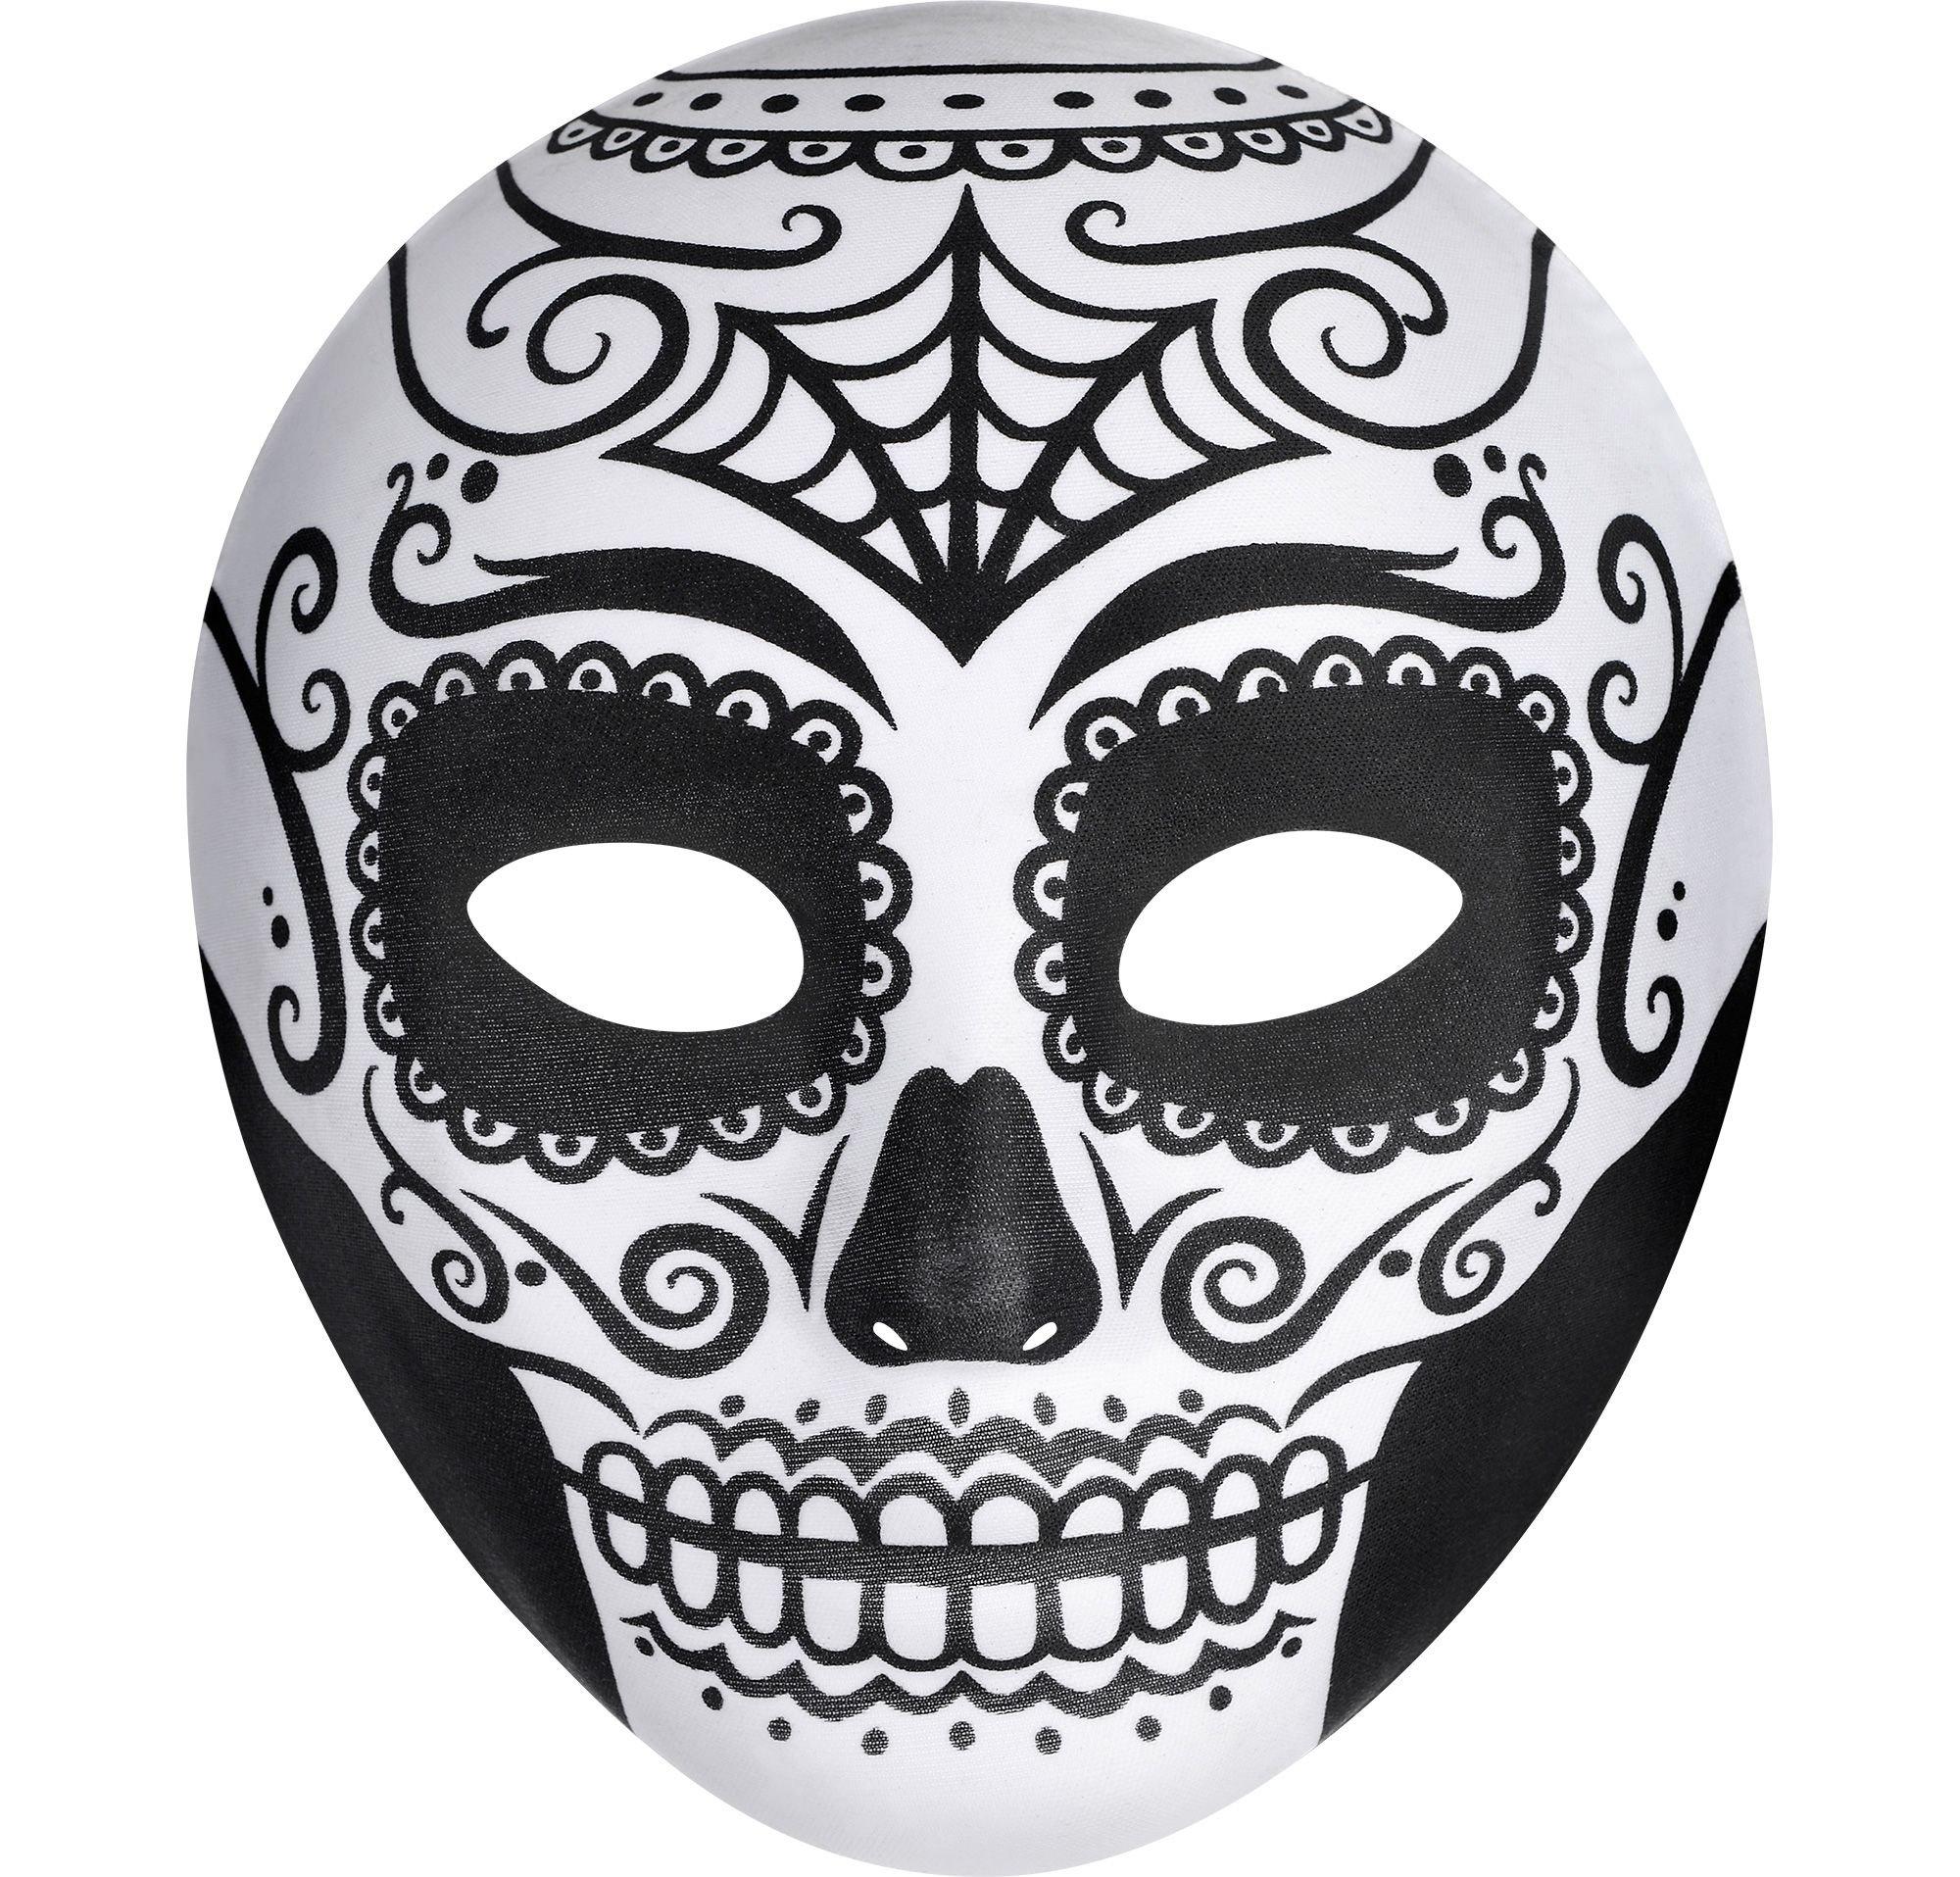 day of the dead black and white